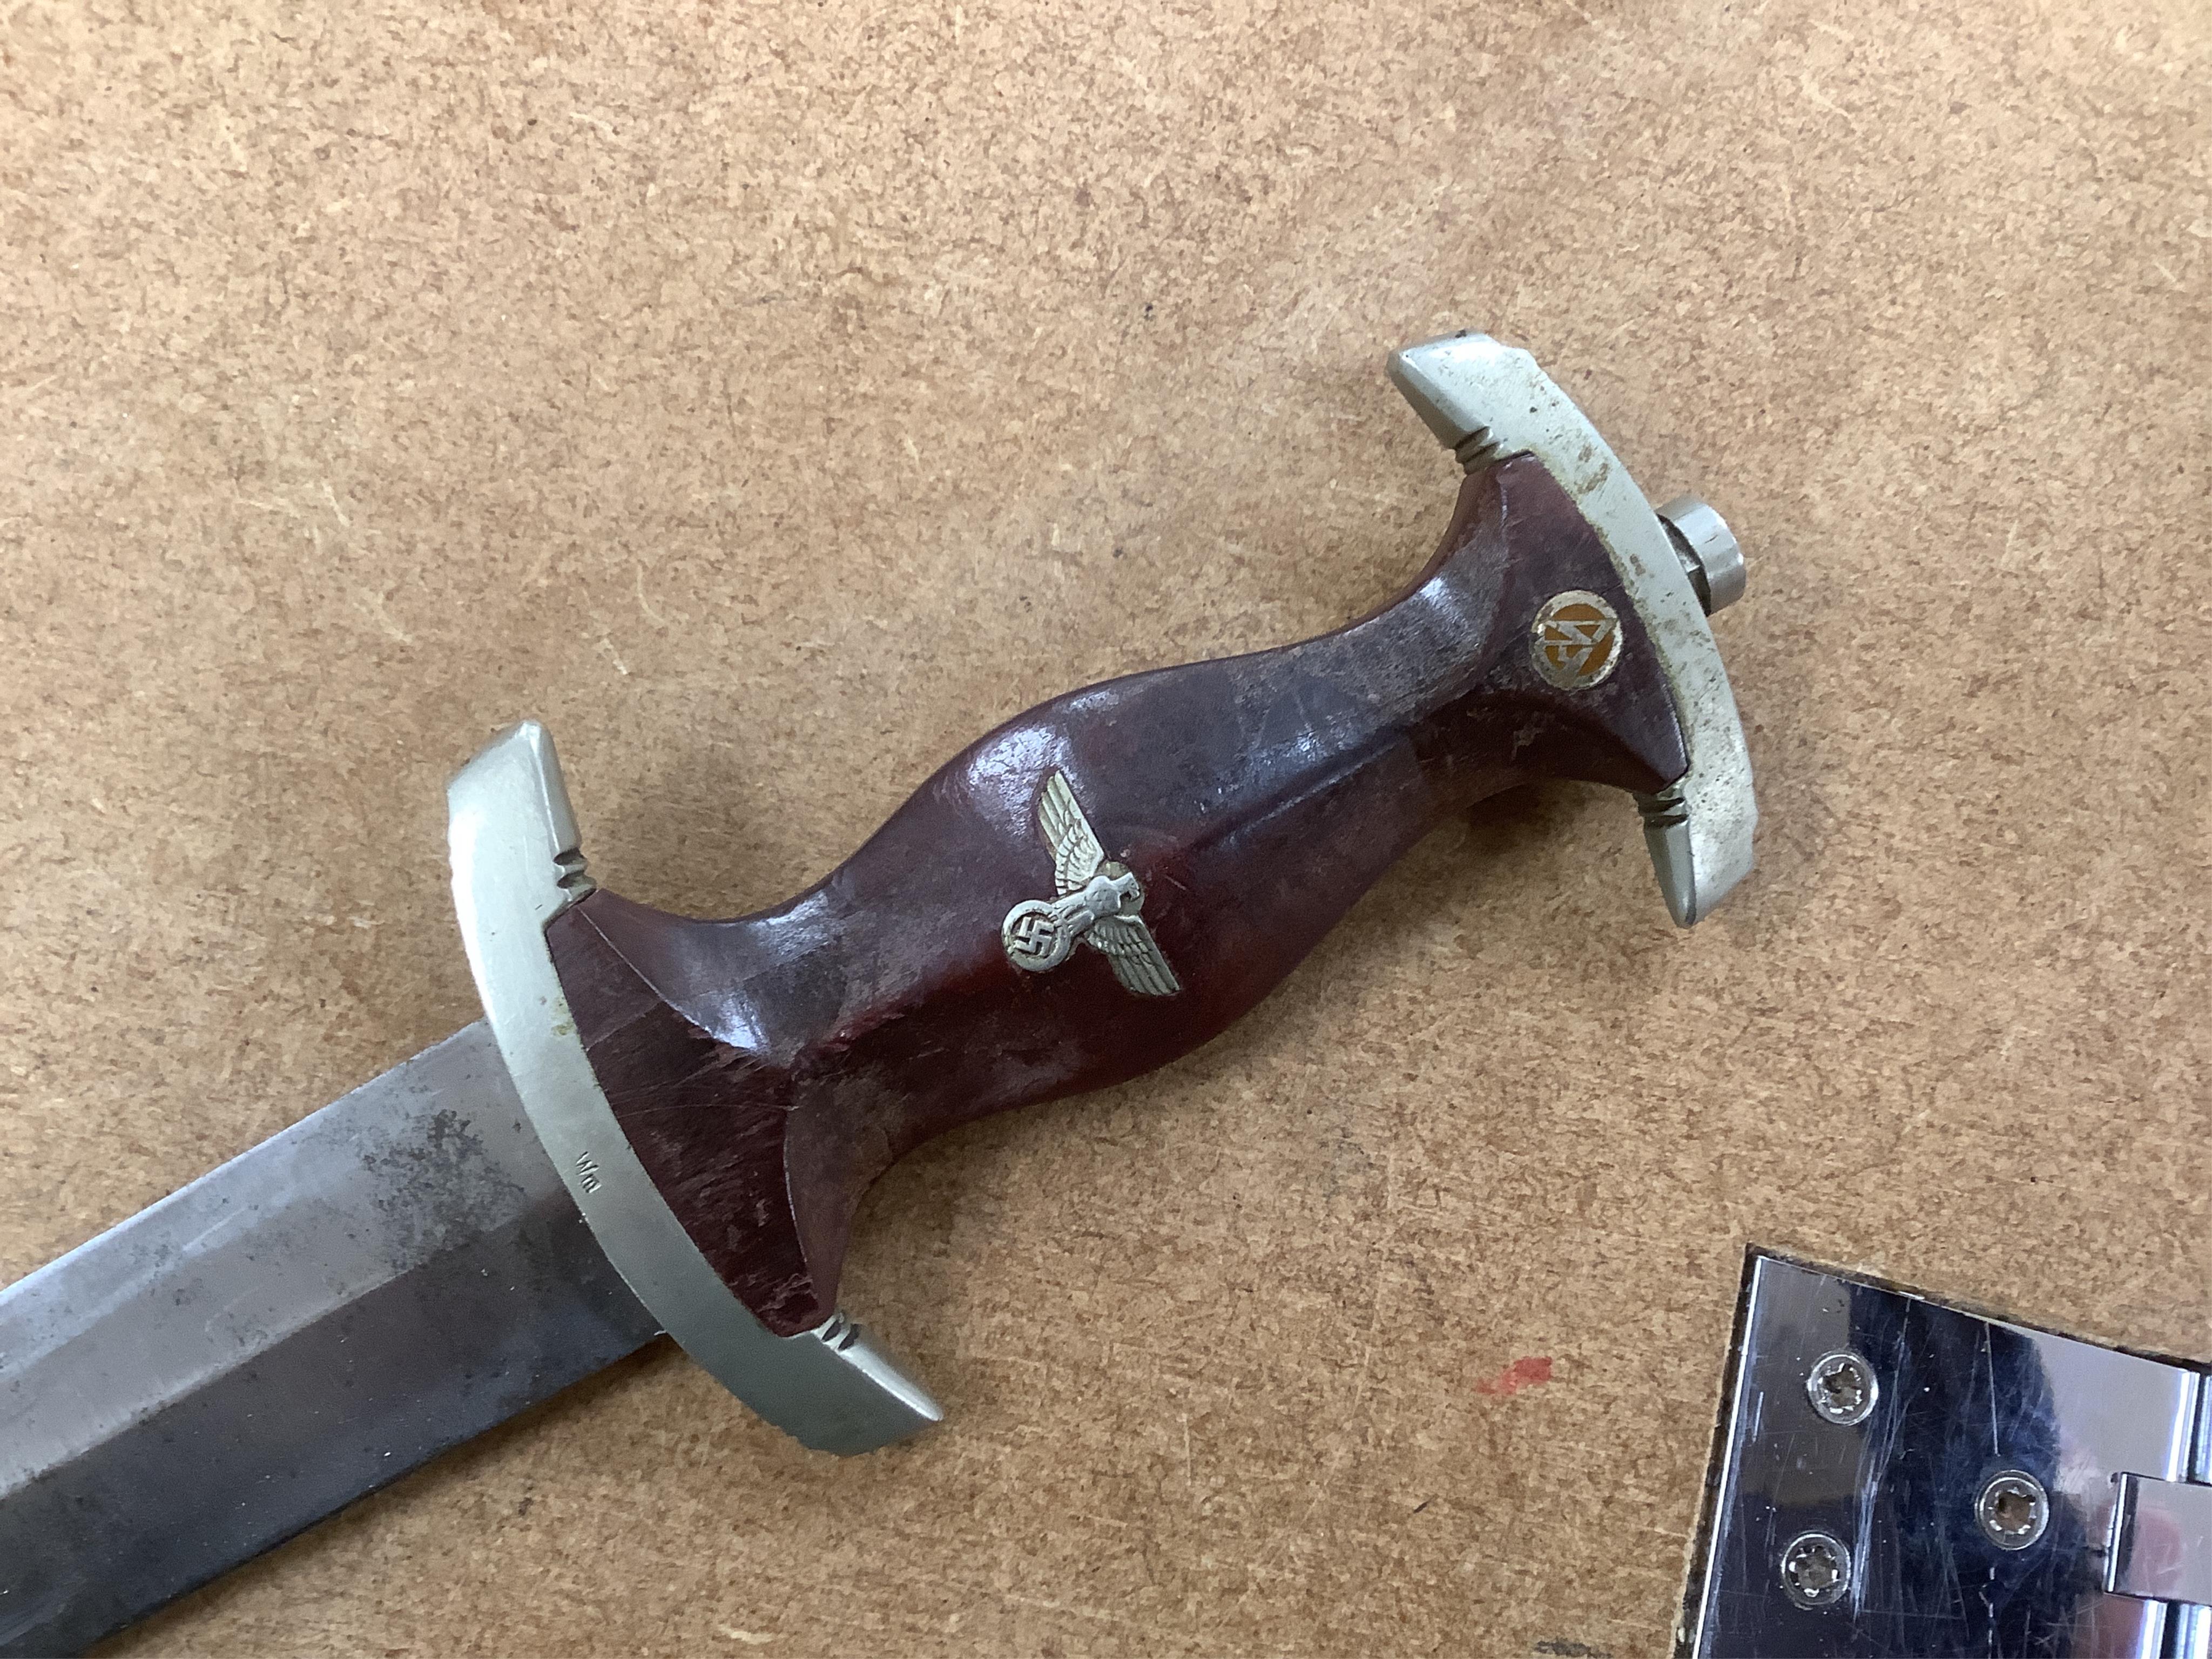 A WWII German SA dagger, regulation pattern in its steel scabbard with regulation nickel mounts, and leather hanging band and a German dress bayonet by Paul Seilheimer. Condition - fair, some wear